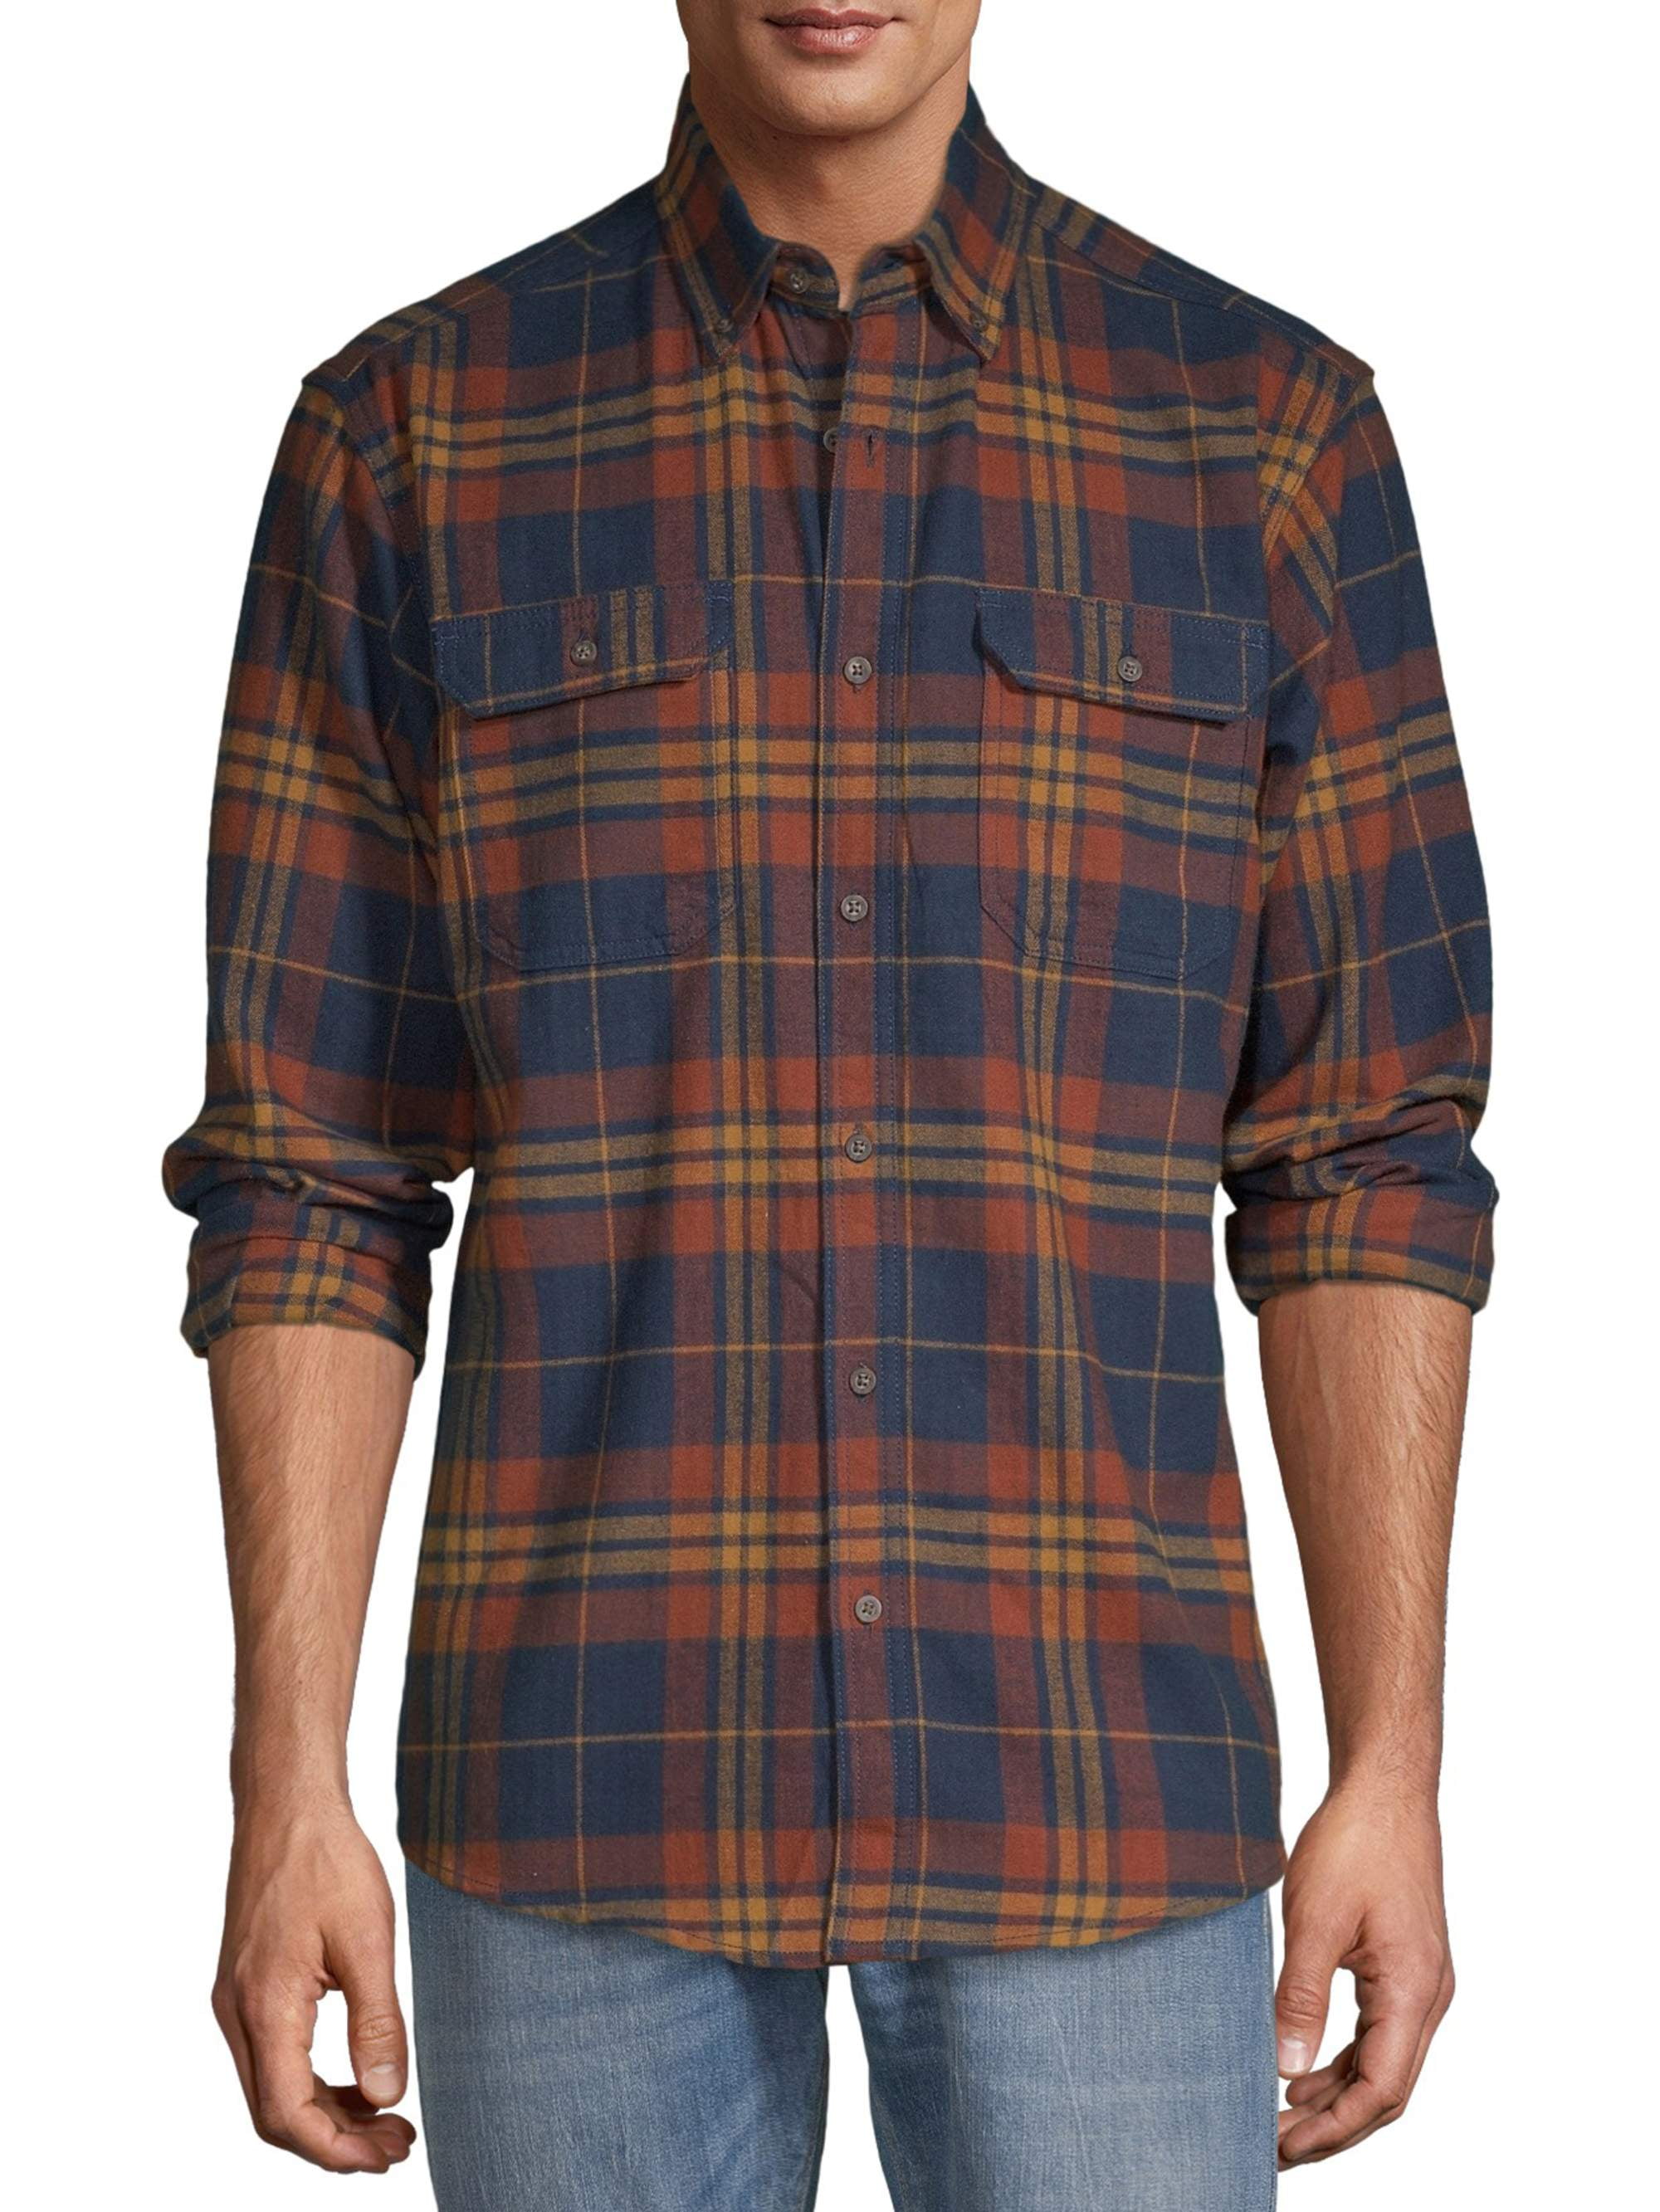 George Men's and Big Men's Long Sleeve Super Soft Flannel Shirt, up to ...